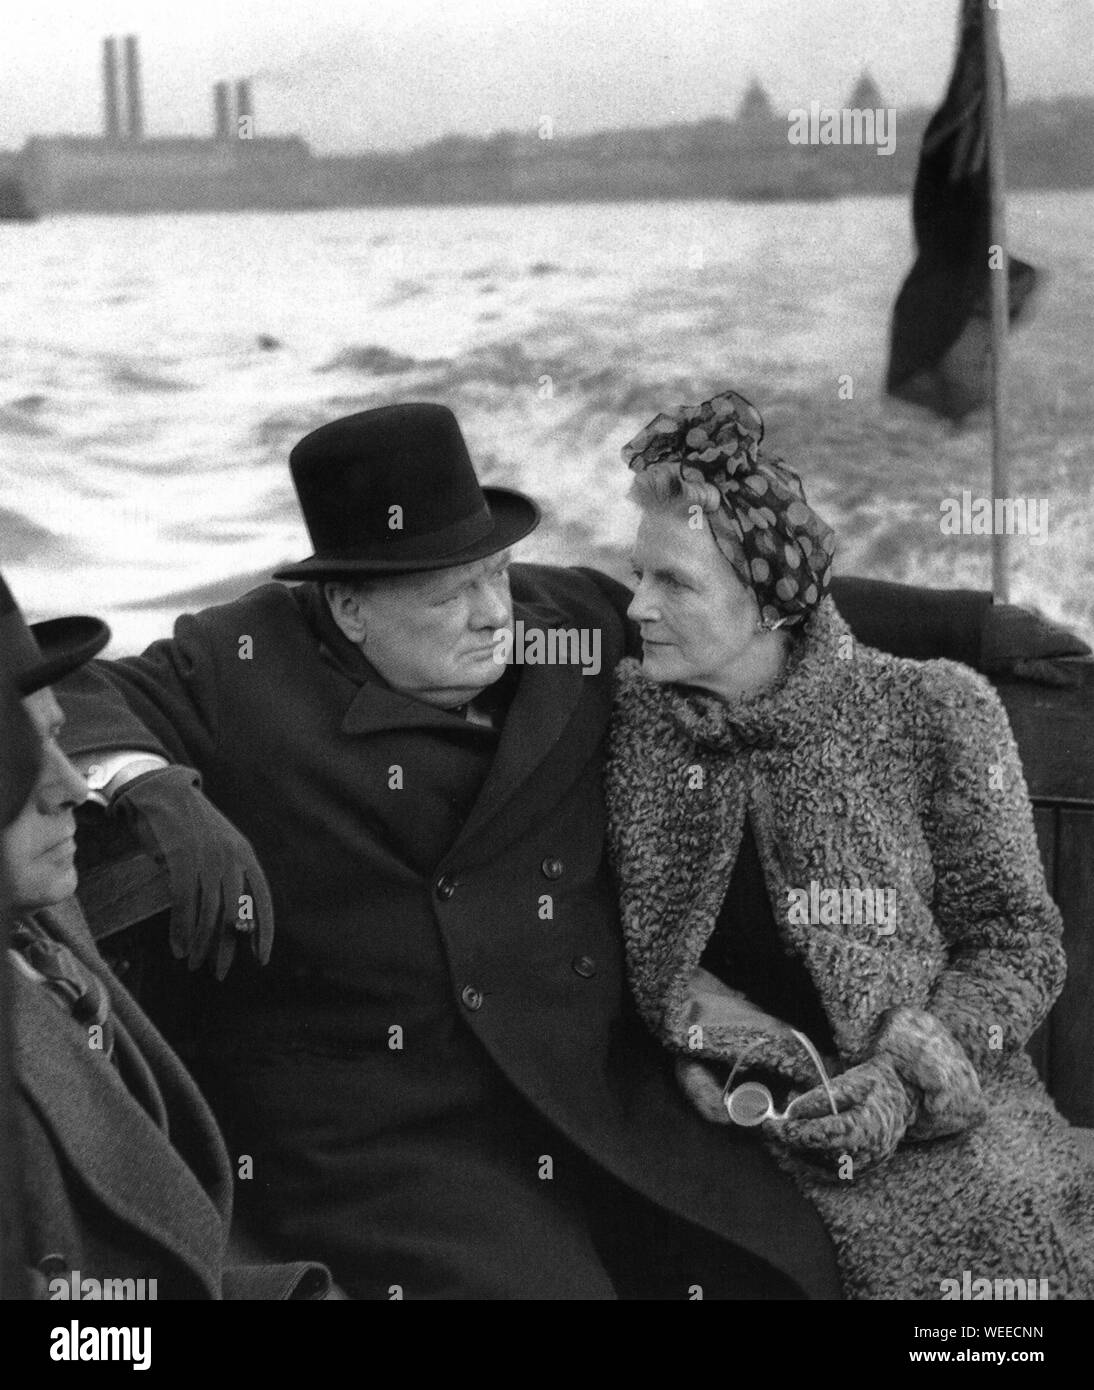 Winston Churchill with his wife Clementine inspect bomb damage from a launch on the Thames. 25th September 1940 Stock Photo